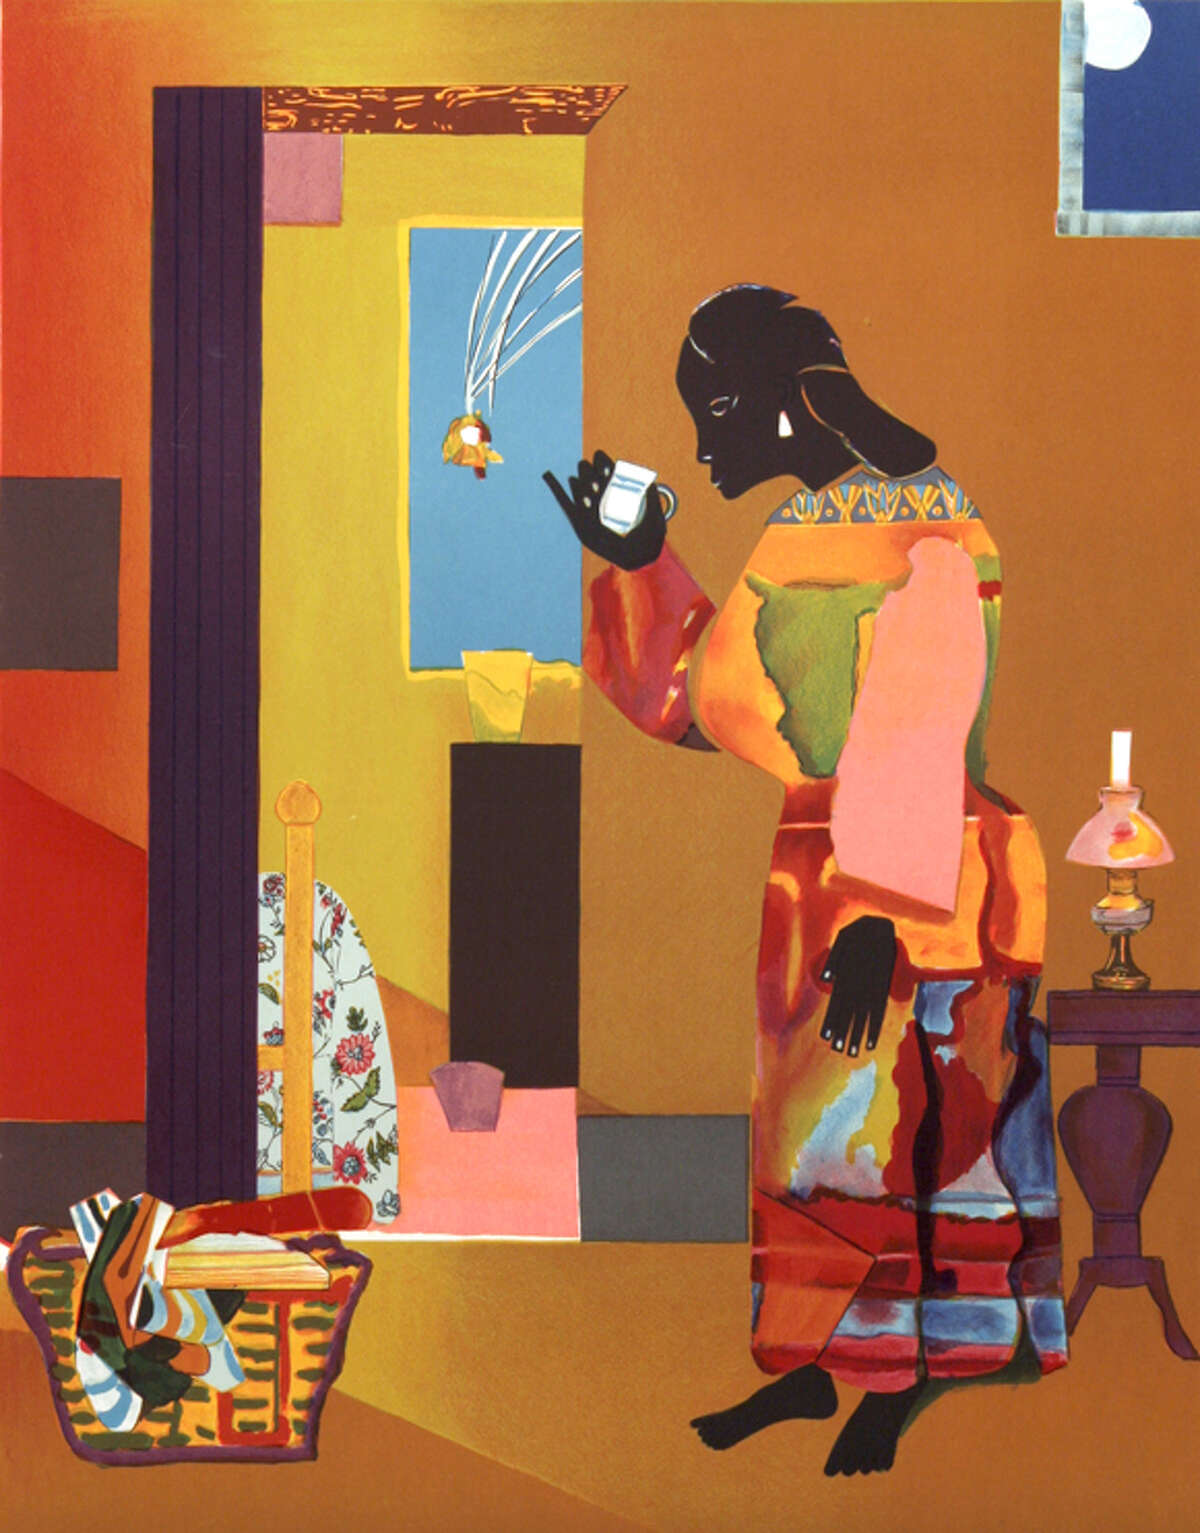 Exhibit of Romare Bearden's prints a mustsee show at The Hyde